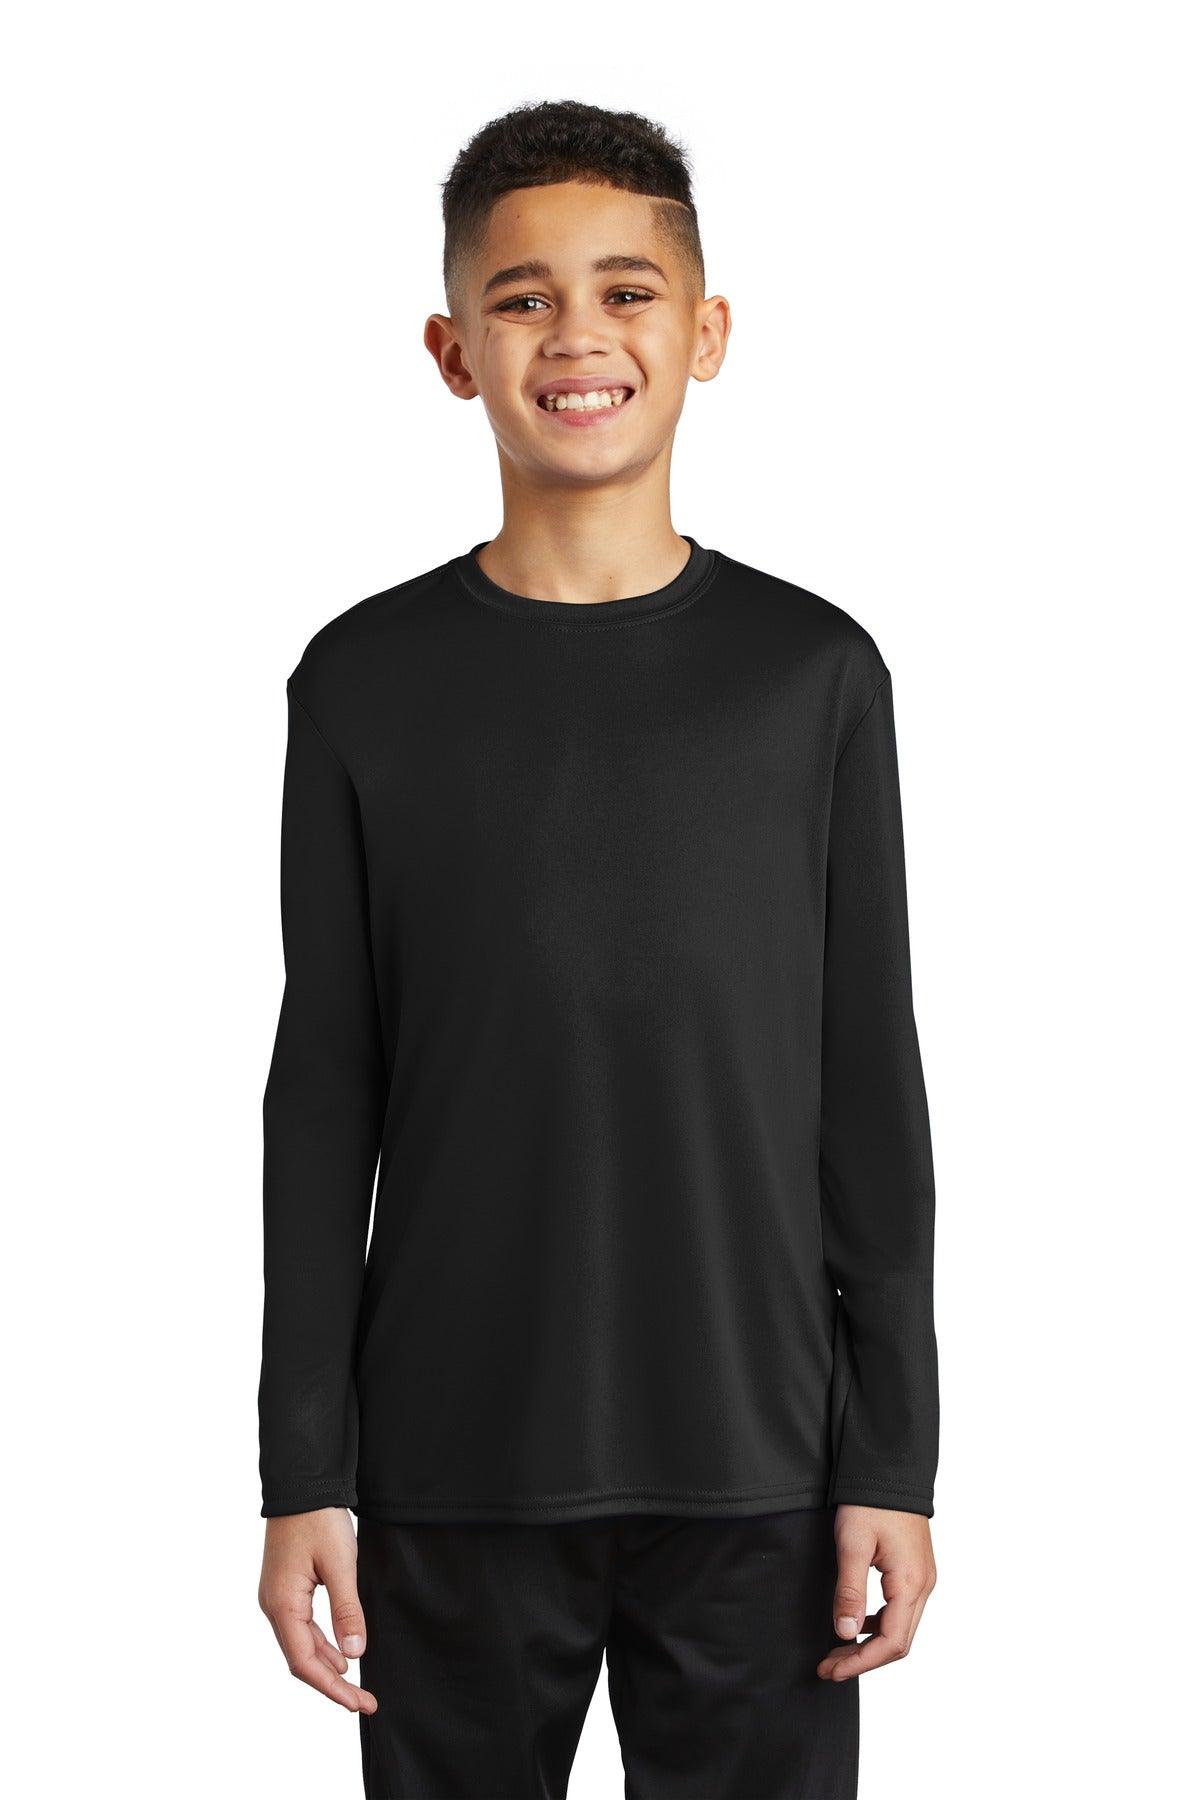 Port & Company Youth Long Sleeve Performance Tee PC380YLS - Dresses Max